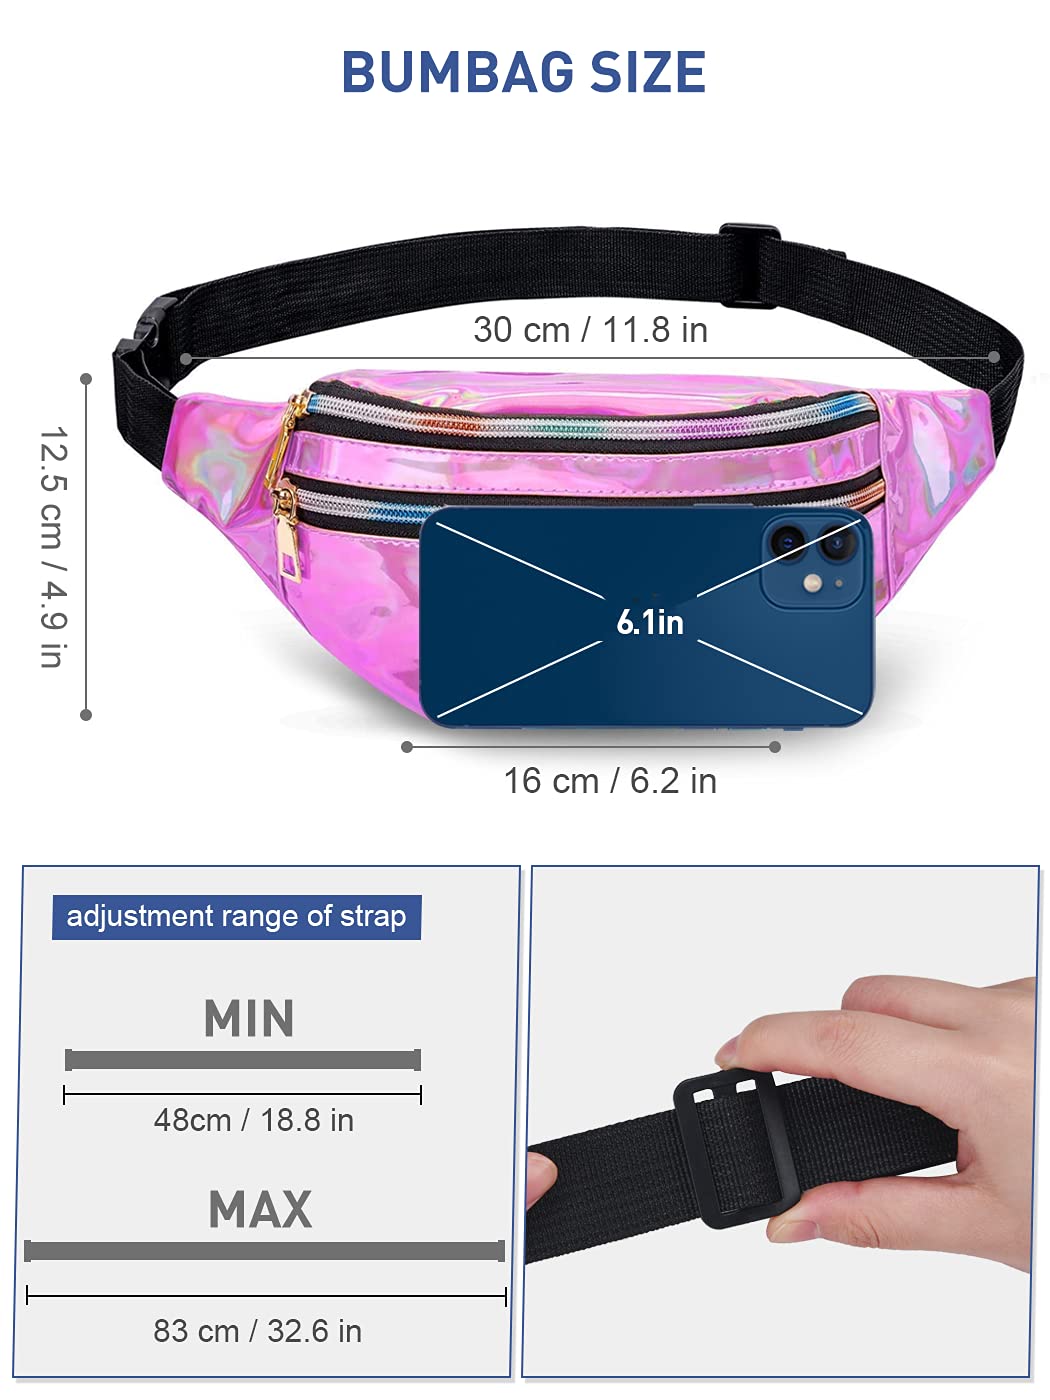 LIVACASA Holographic Fanny Packs for Women Cute Waist Packs Shiny Waist Bum Bag Waterproof for Travel Party Festival Running Hiking All Pink